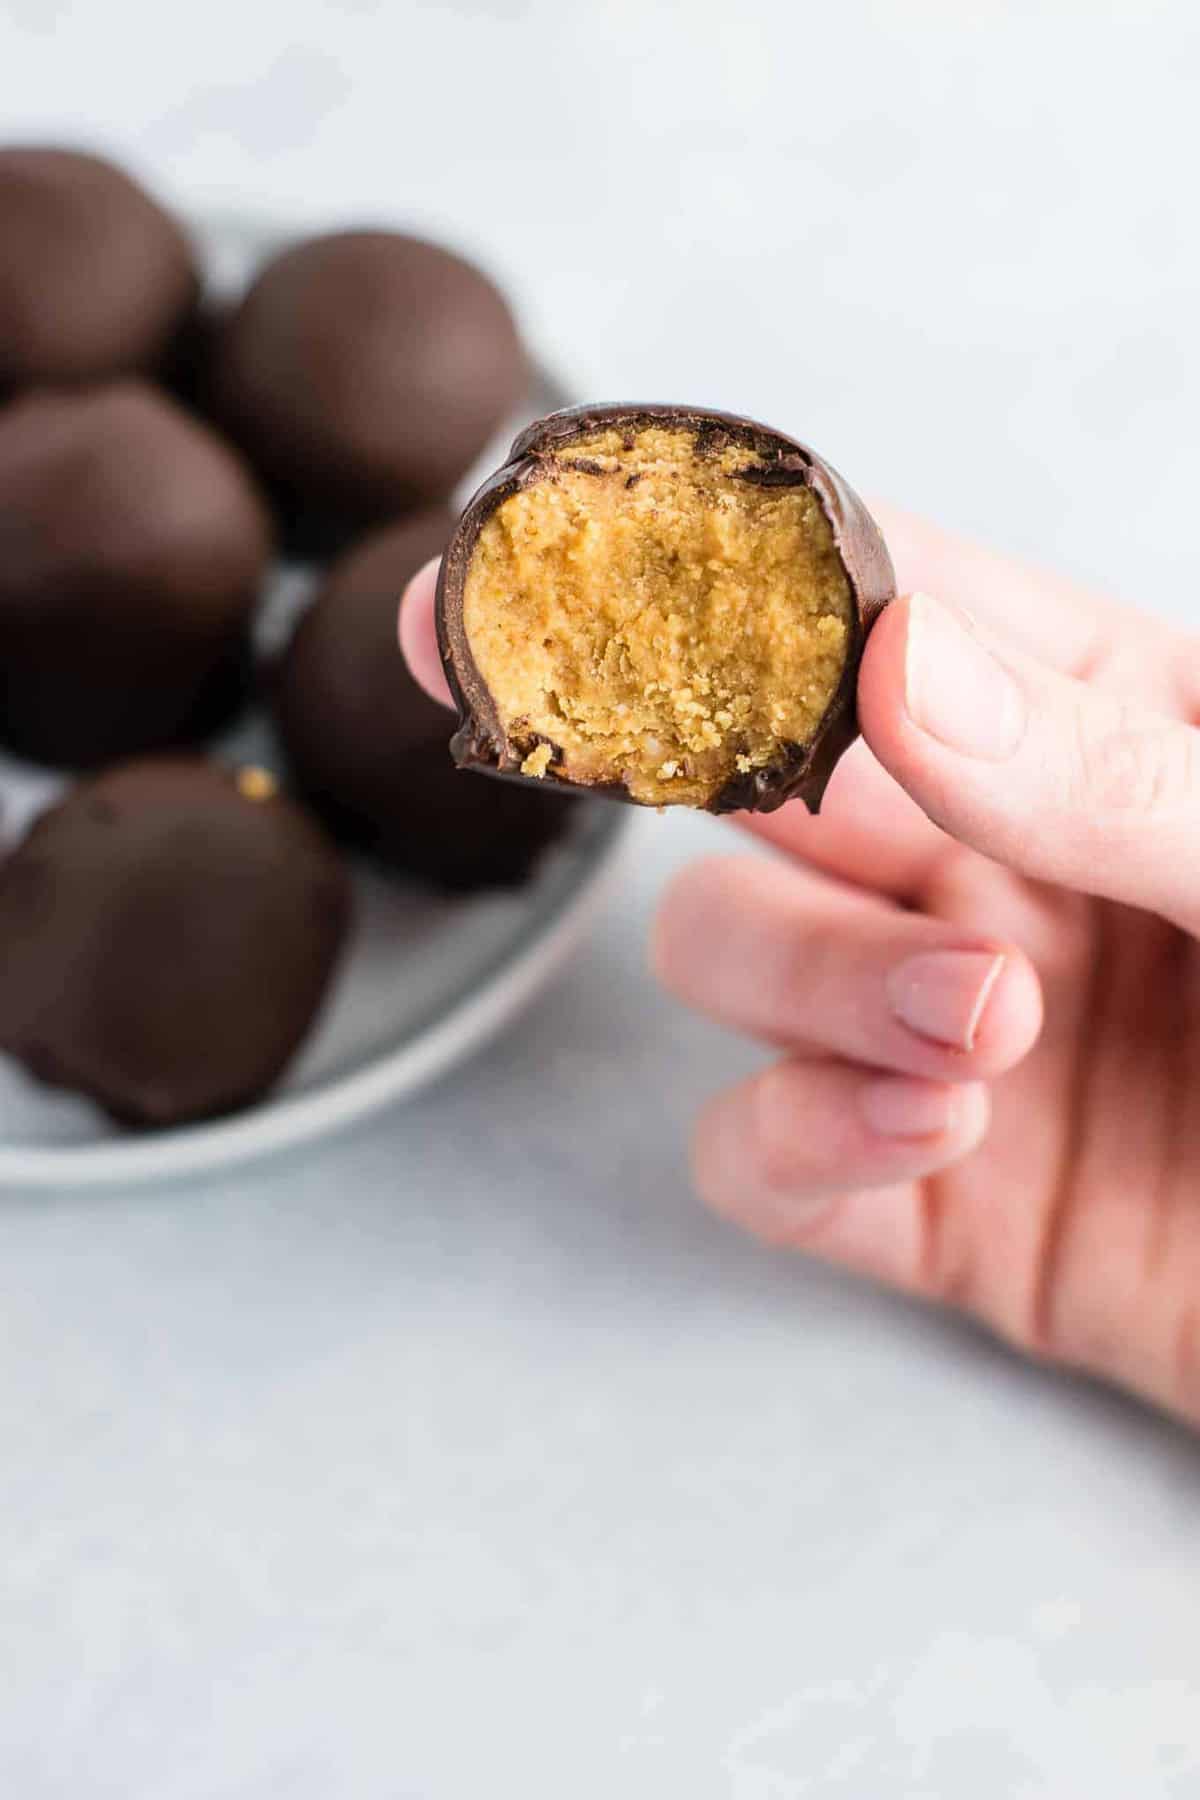 Healthy No Bake Peanut Butter Truffles recipe made with all vegan and gluten free ingredients. A healthier alternative without sacrificing flavor! NO ONE will guess this is a healthy recipe! #vegan #glutenfree #peanutbutter #nobake #dessert